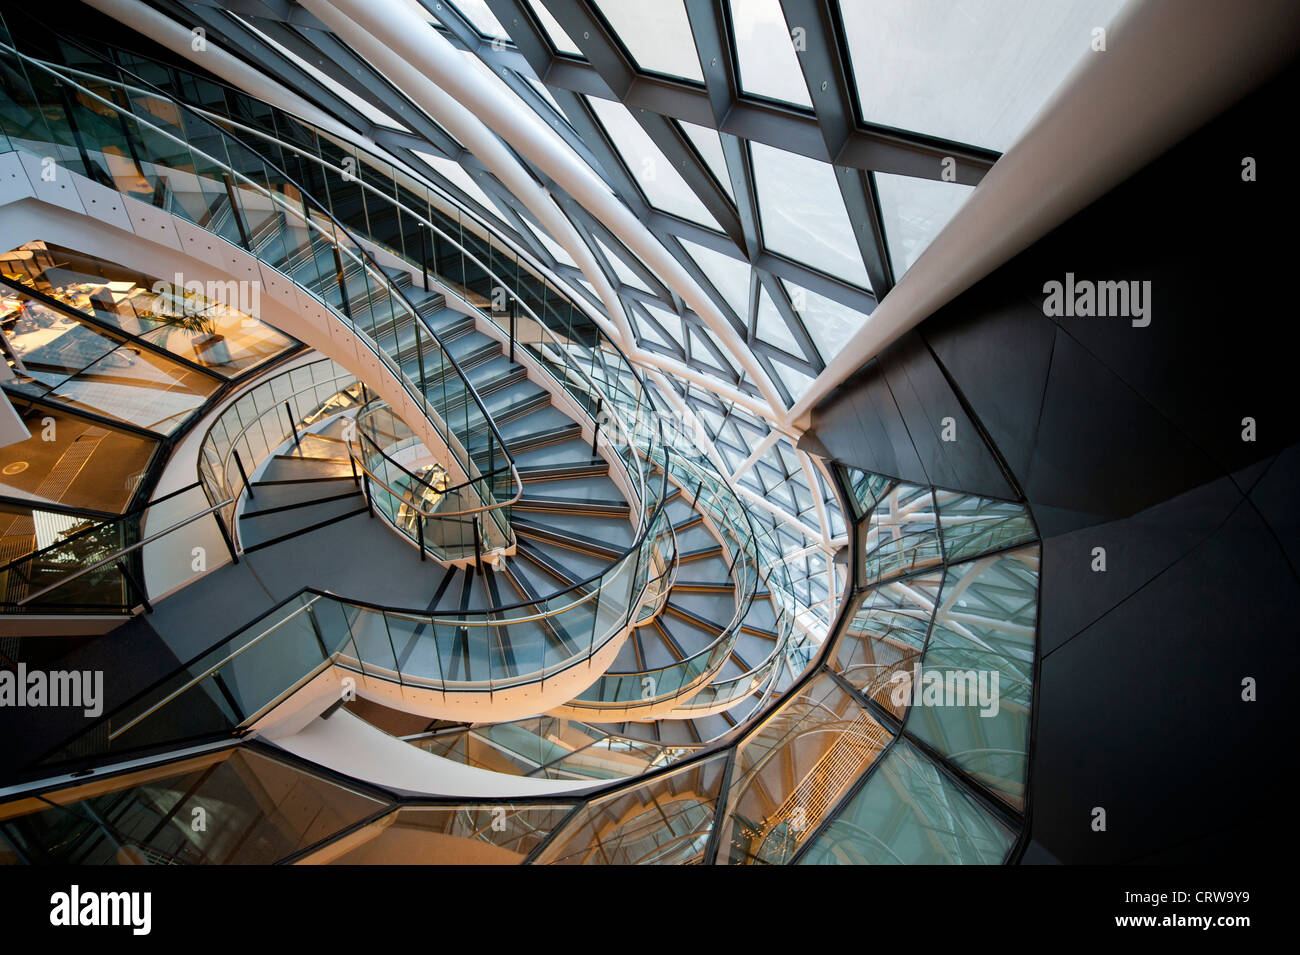 The interior spiral staircase of City Hall, from the top. Stock Photo